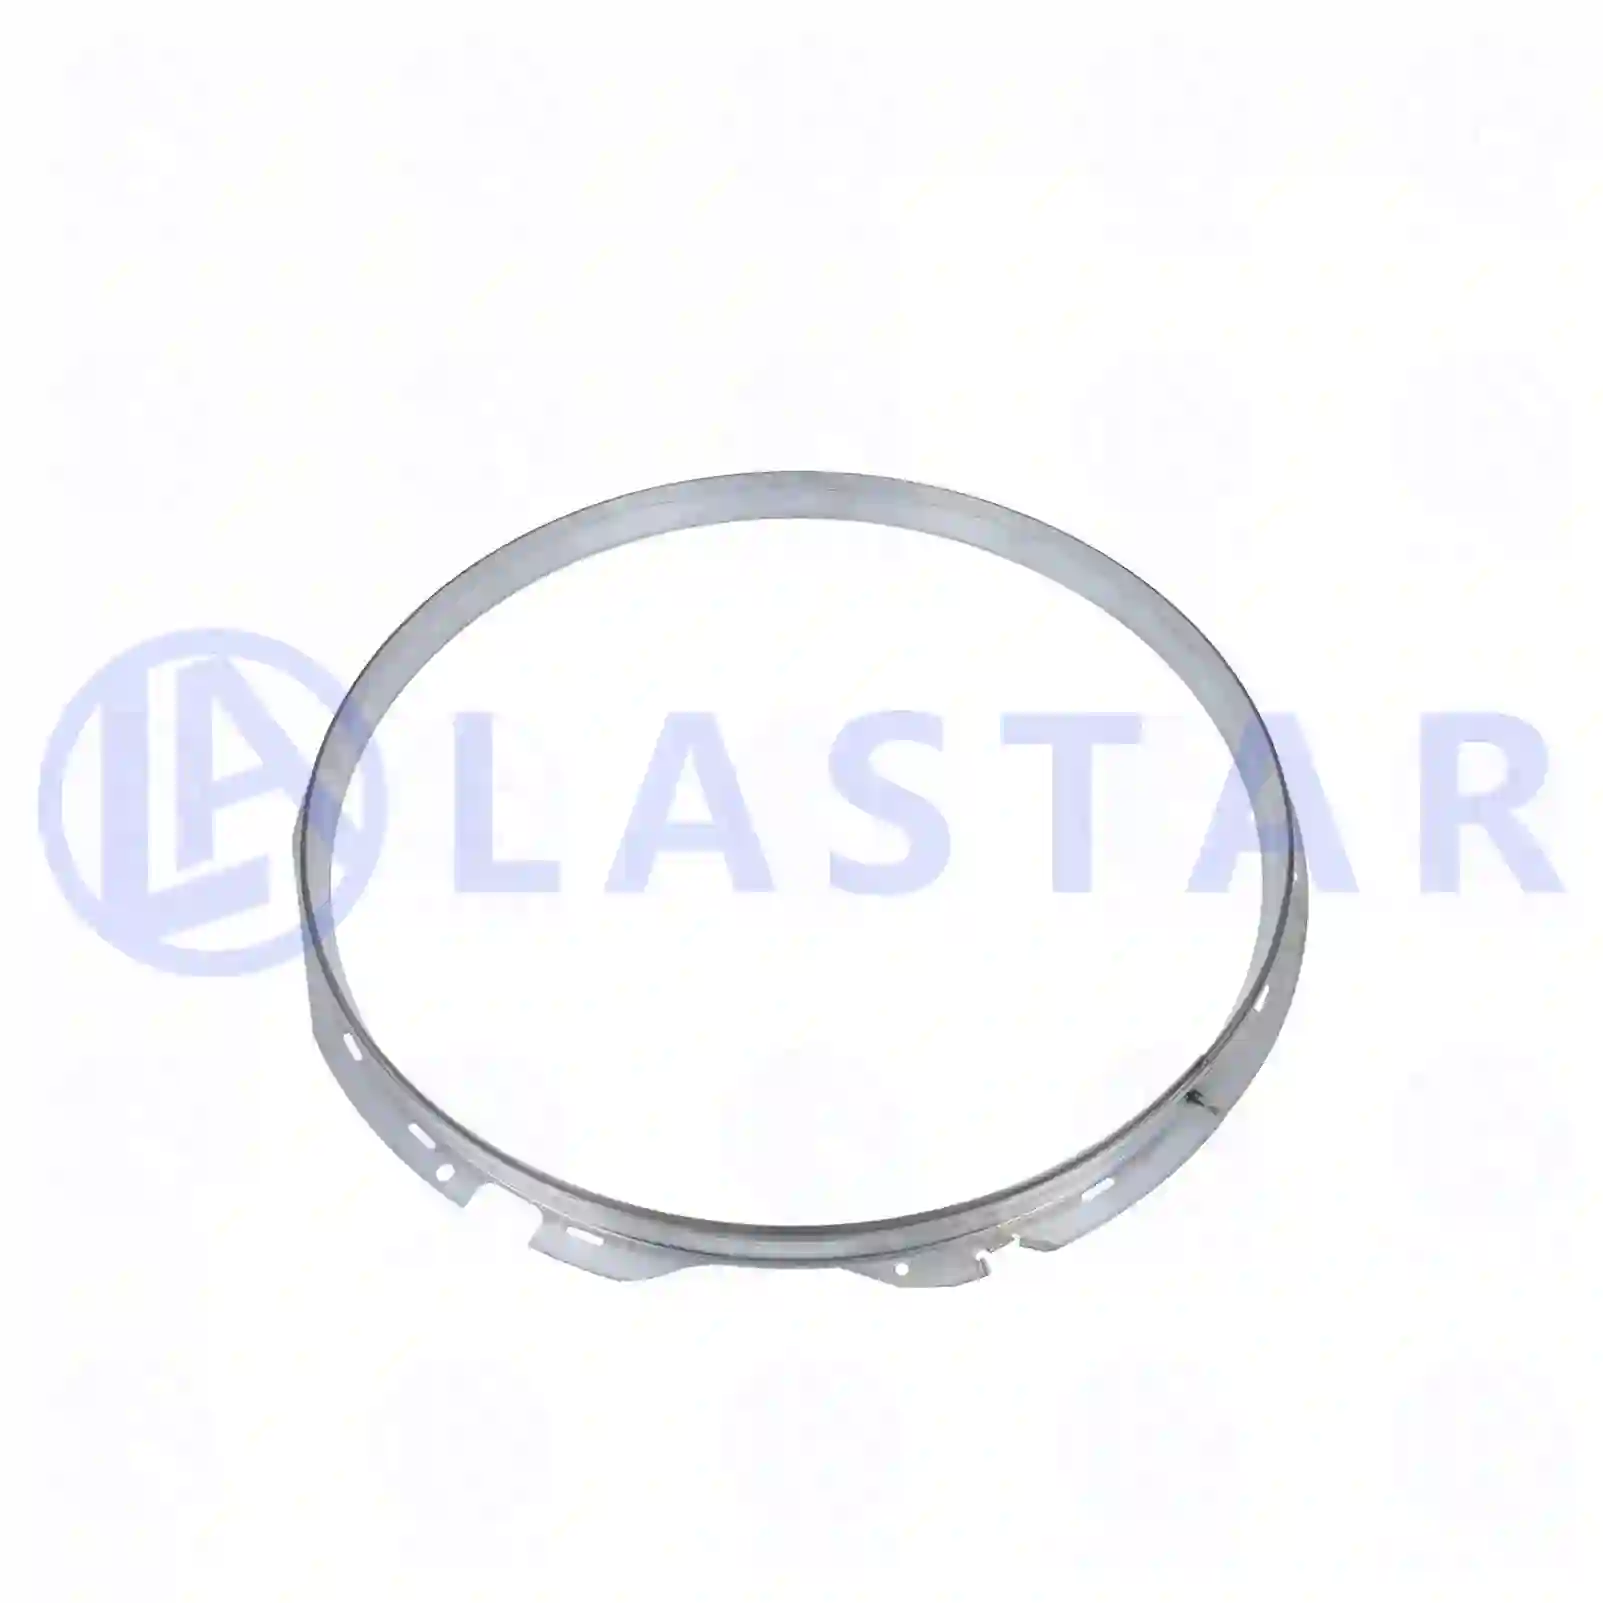 Fan ring, 77709776, 1371781, 1379498, 1440404, 1511832 ||  77709776 Lastar Spare Part | Truck Spare Parts, Auotomotive Spare Parts Fan ring, 77709776, 1371781, 1379498, 1440404, 1511832 ||  77709776 Lastar Spare Part | Truck Spare Parts, Auotomotive Spare Parts